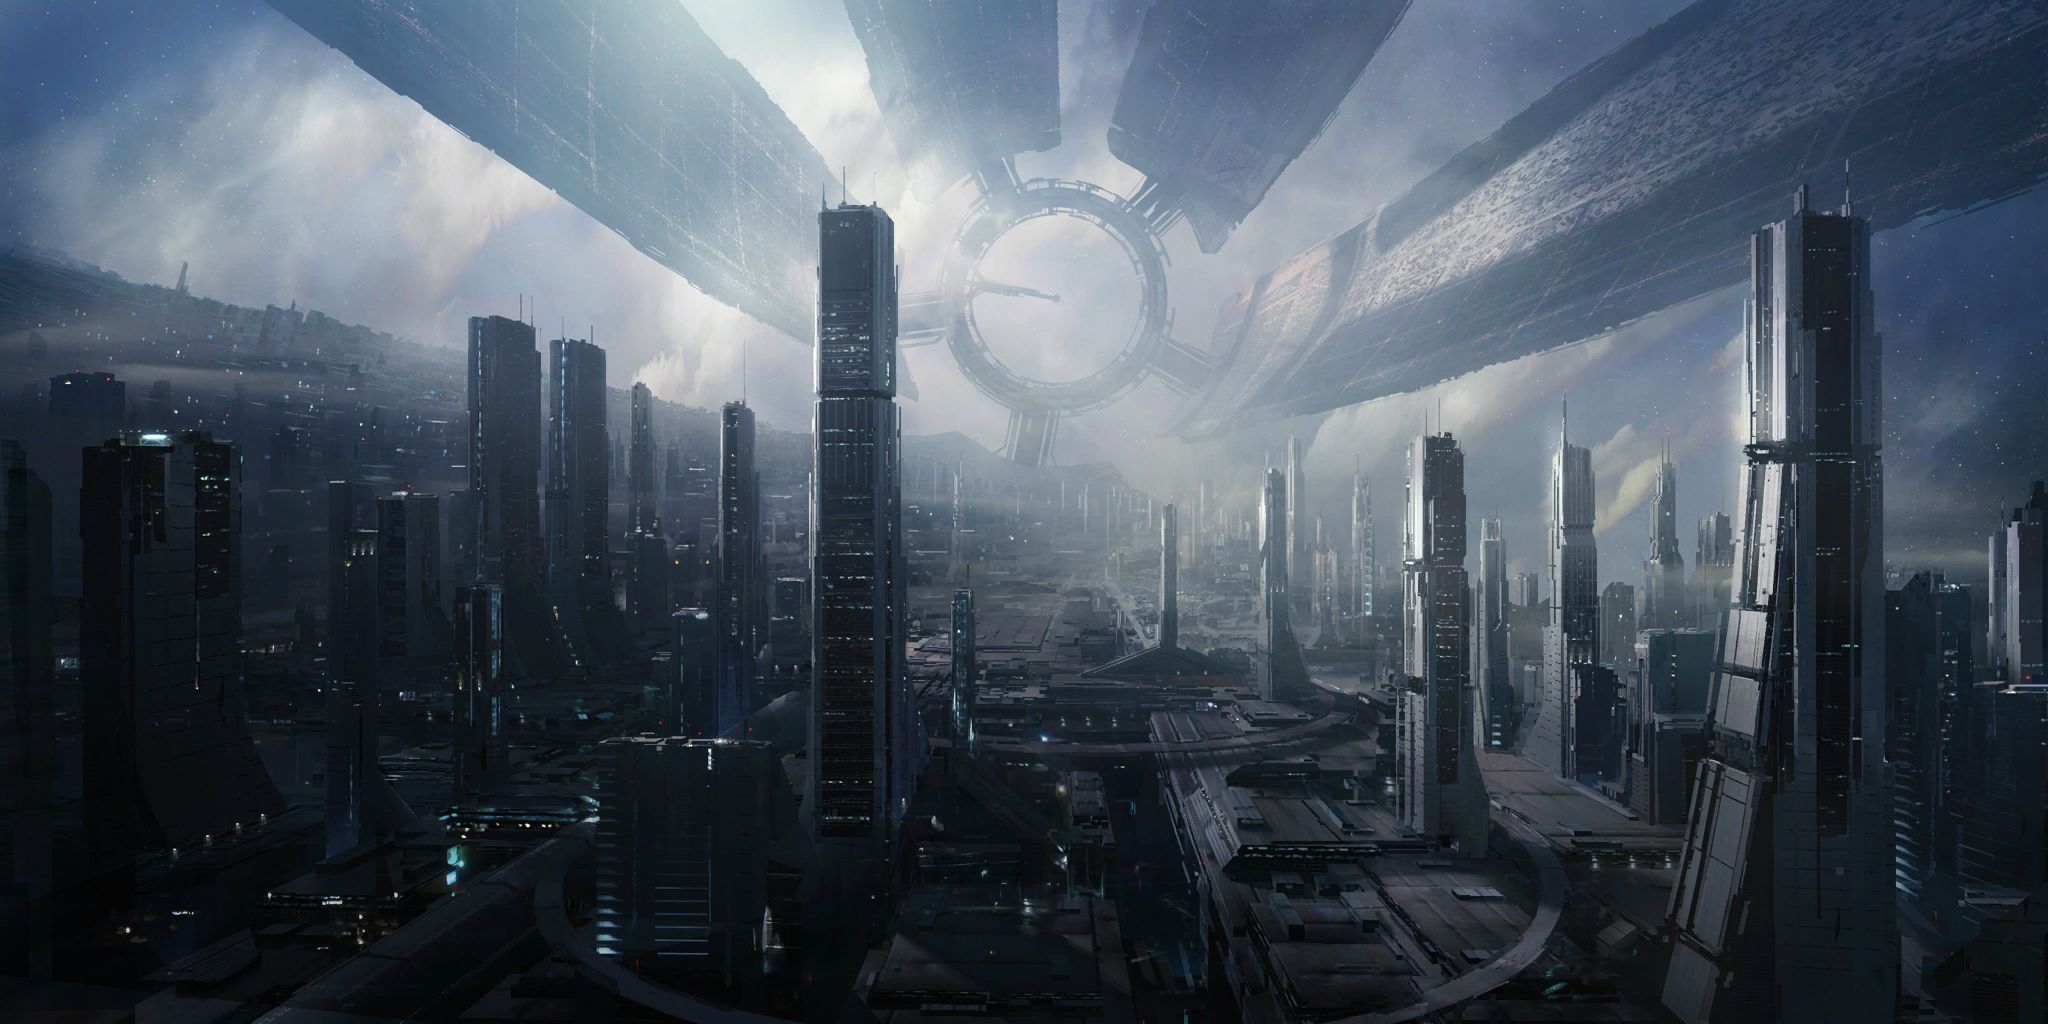 This Is Probably Mass Effect Artwork Showing The Citadel